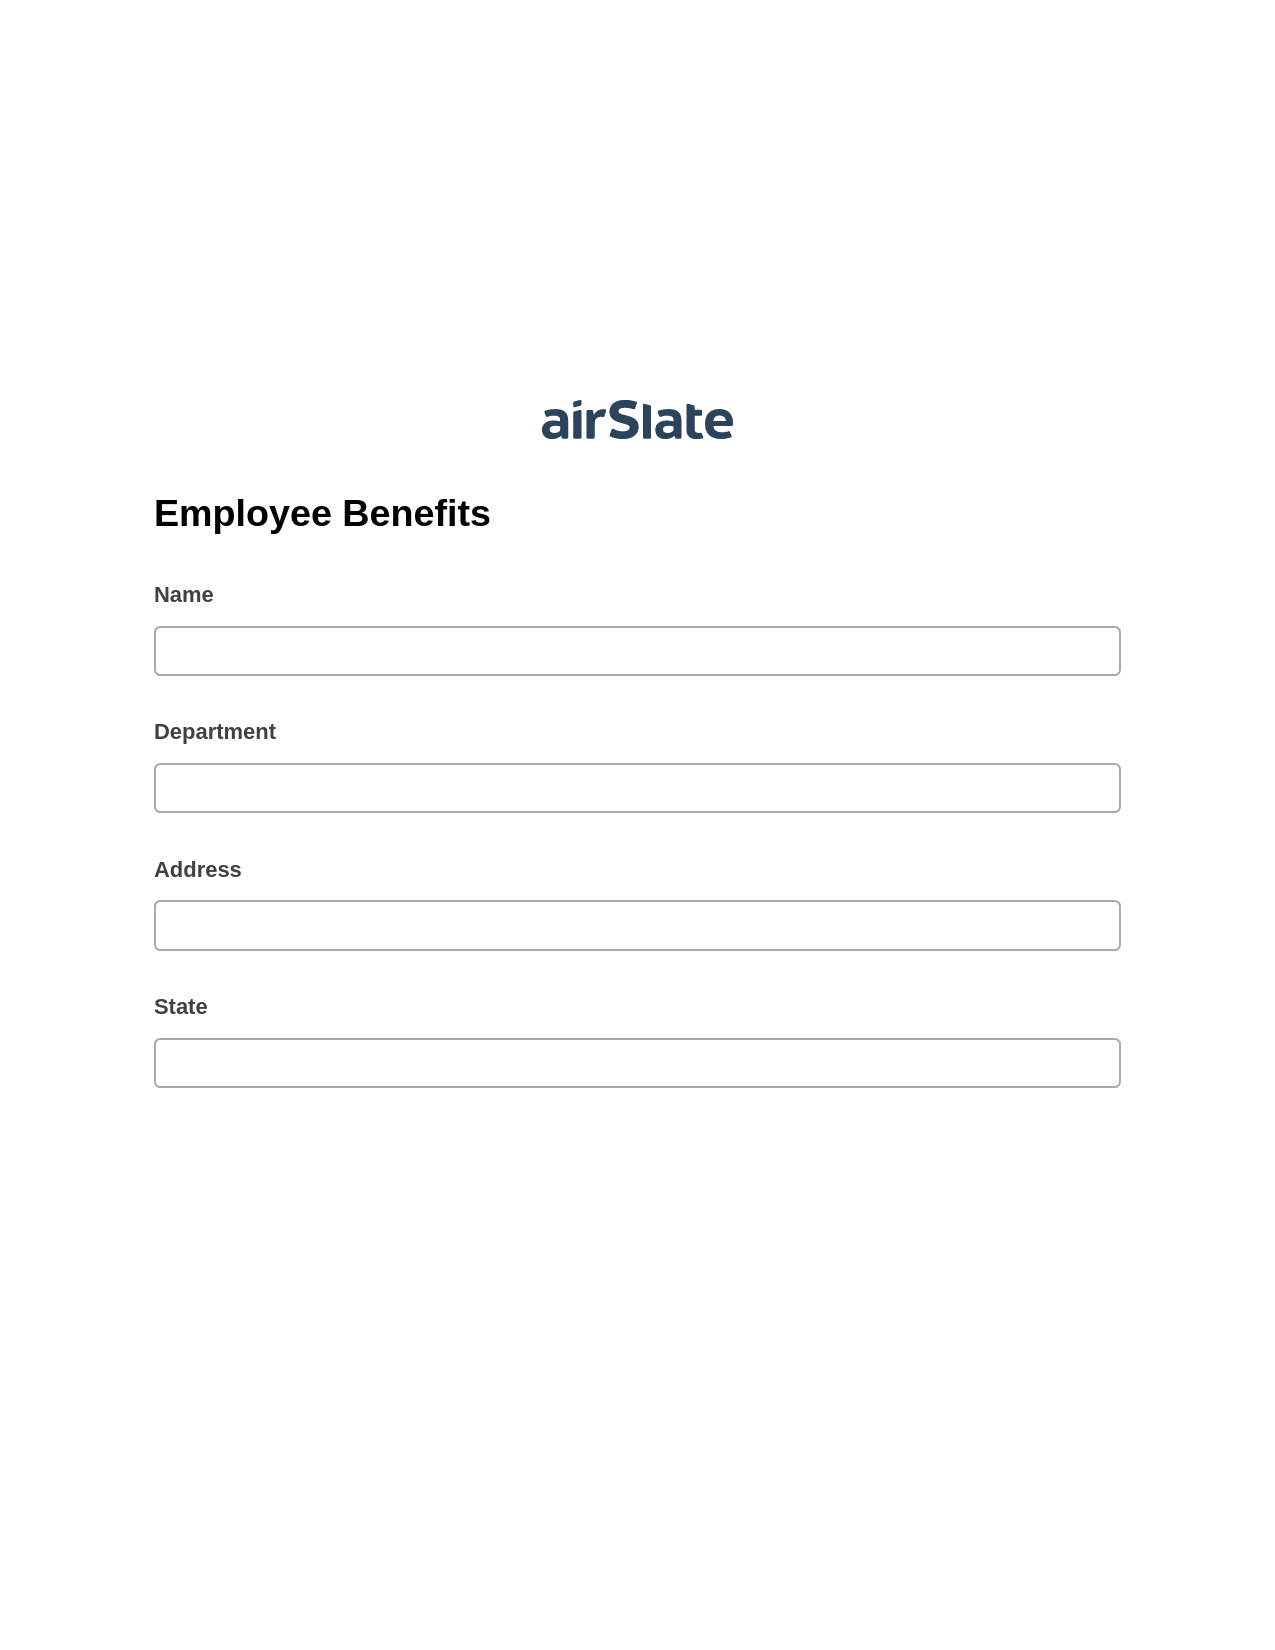 Employee Benefits Pre-fill from Salesforce Records with SOQL Bot, Webhook Bot, Google Drive Bot